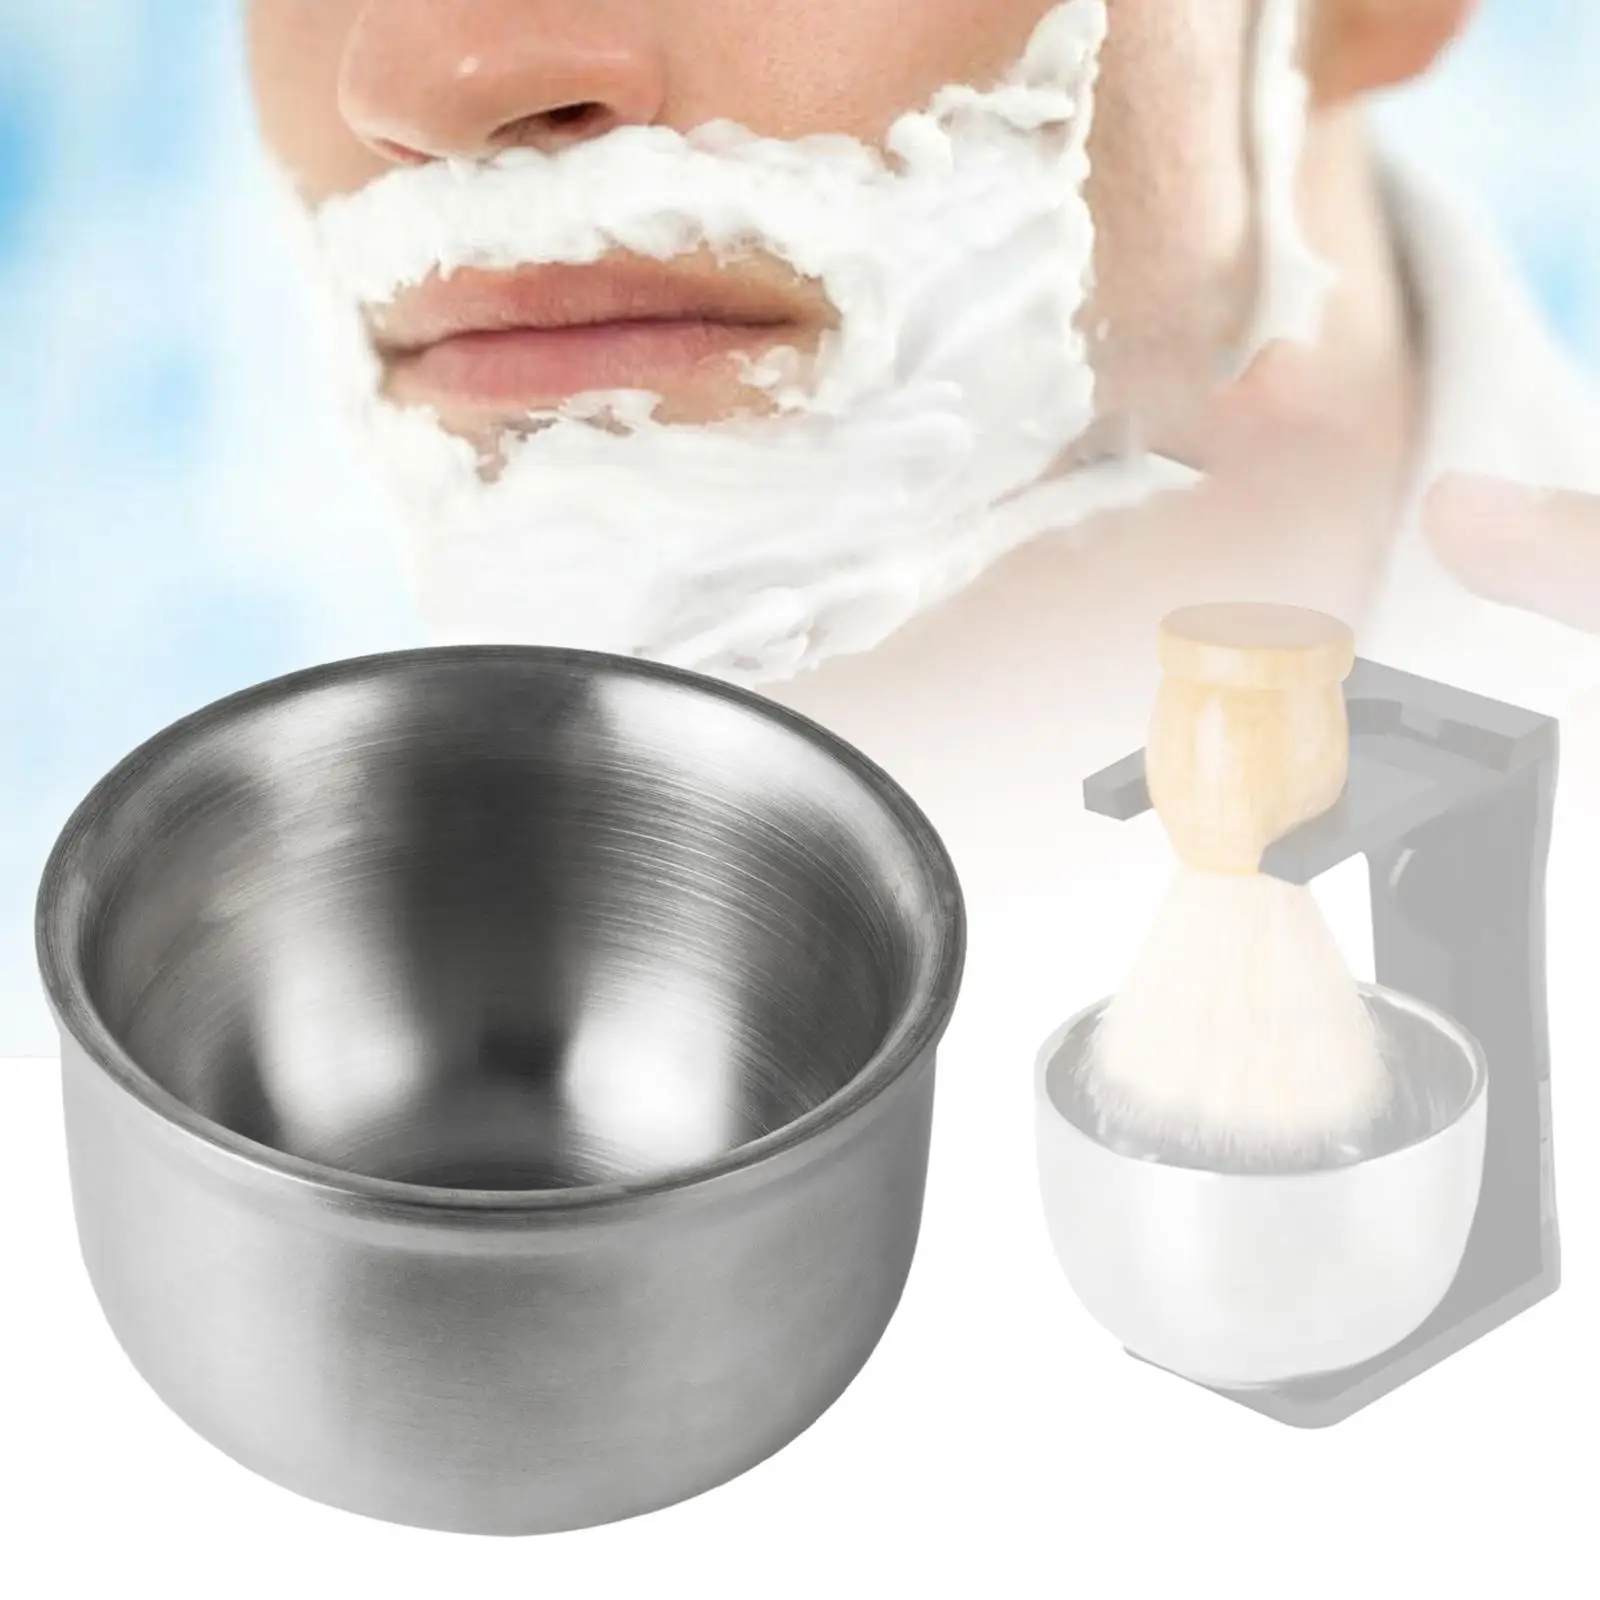 Shaving Soap Bowl Easy to Lather Small Produce Rich Foam Shaving Cup for Men